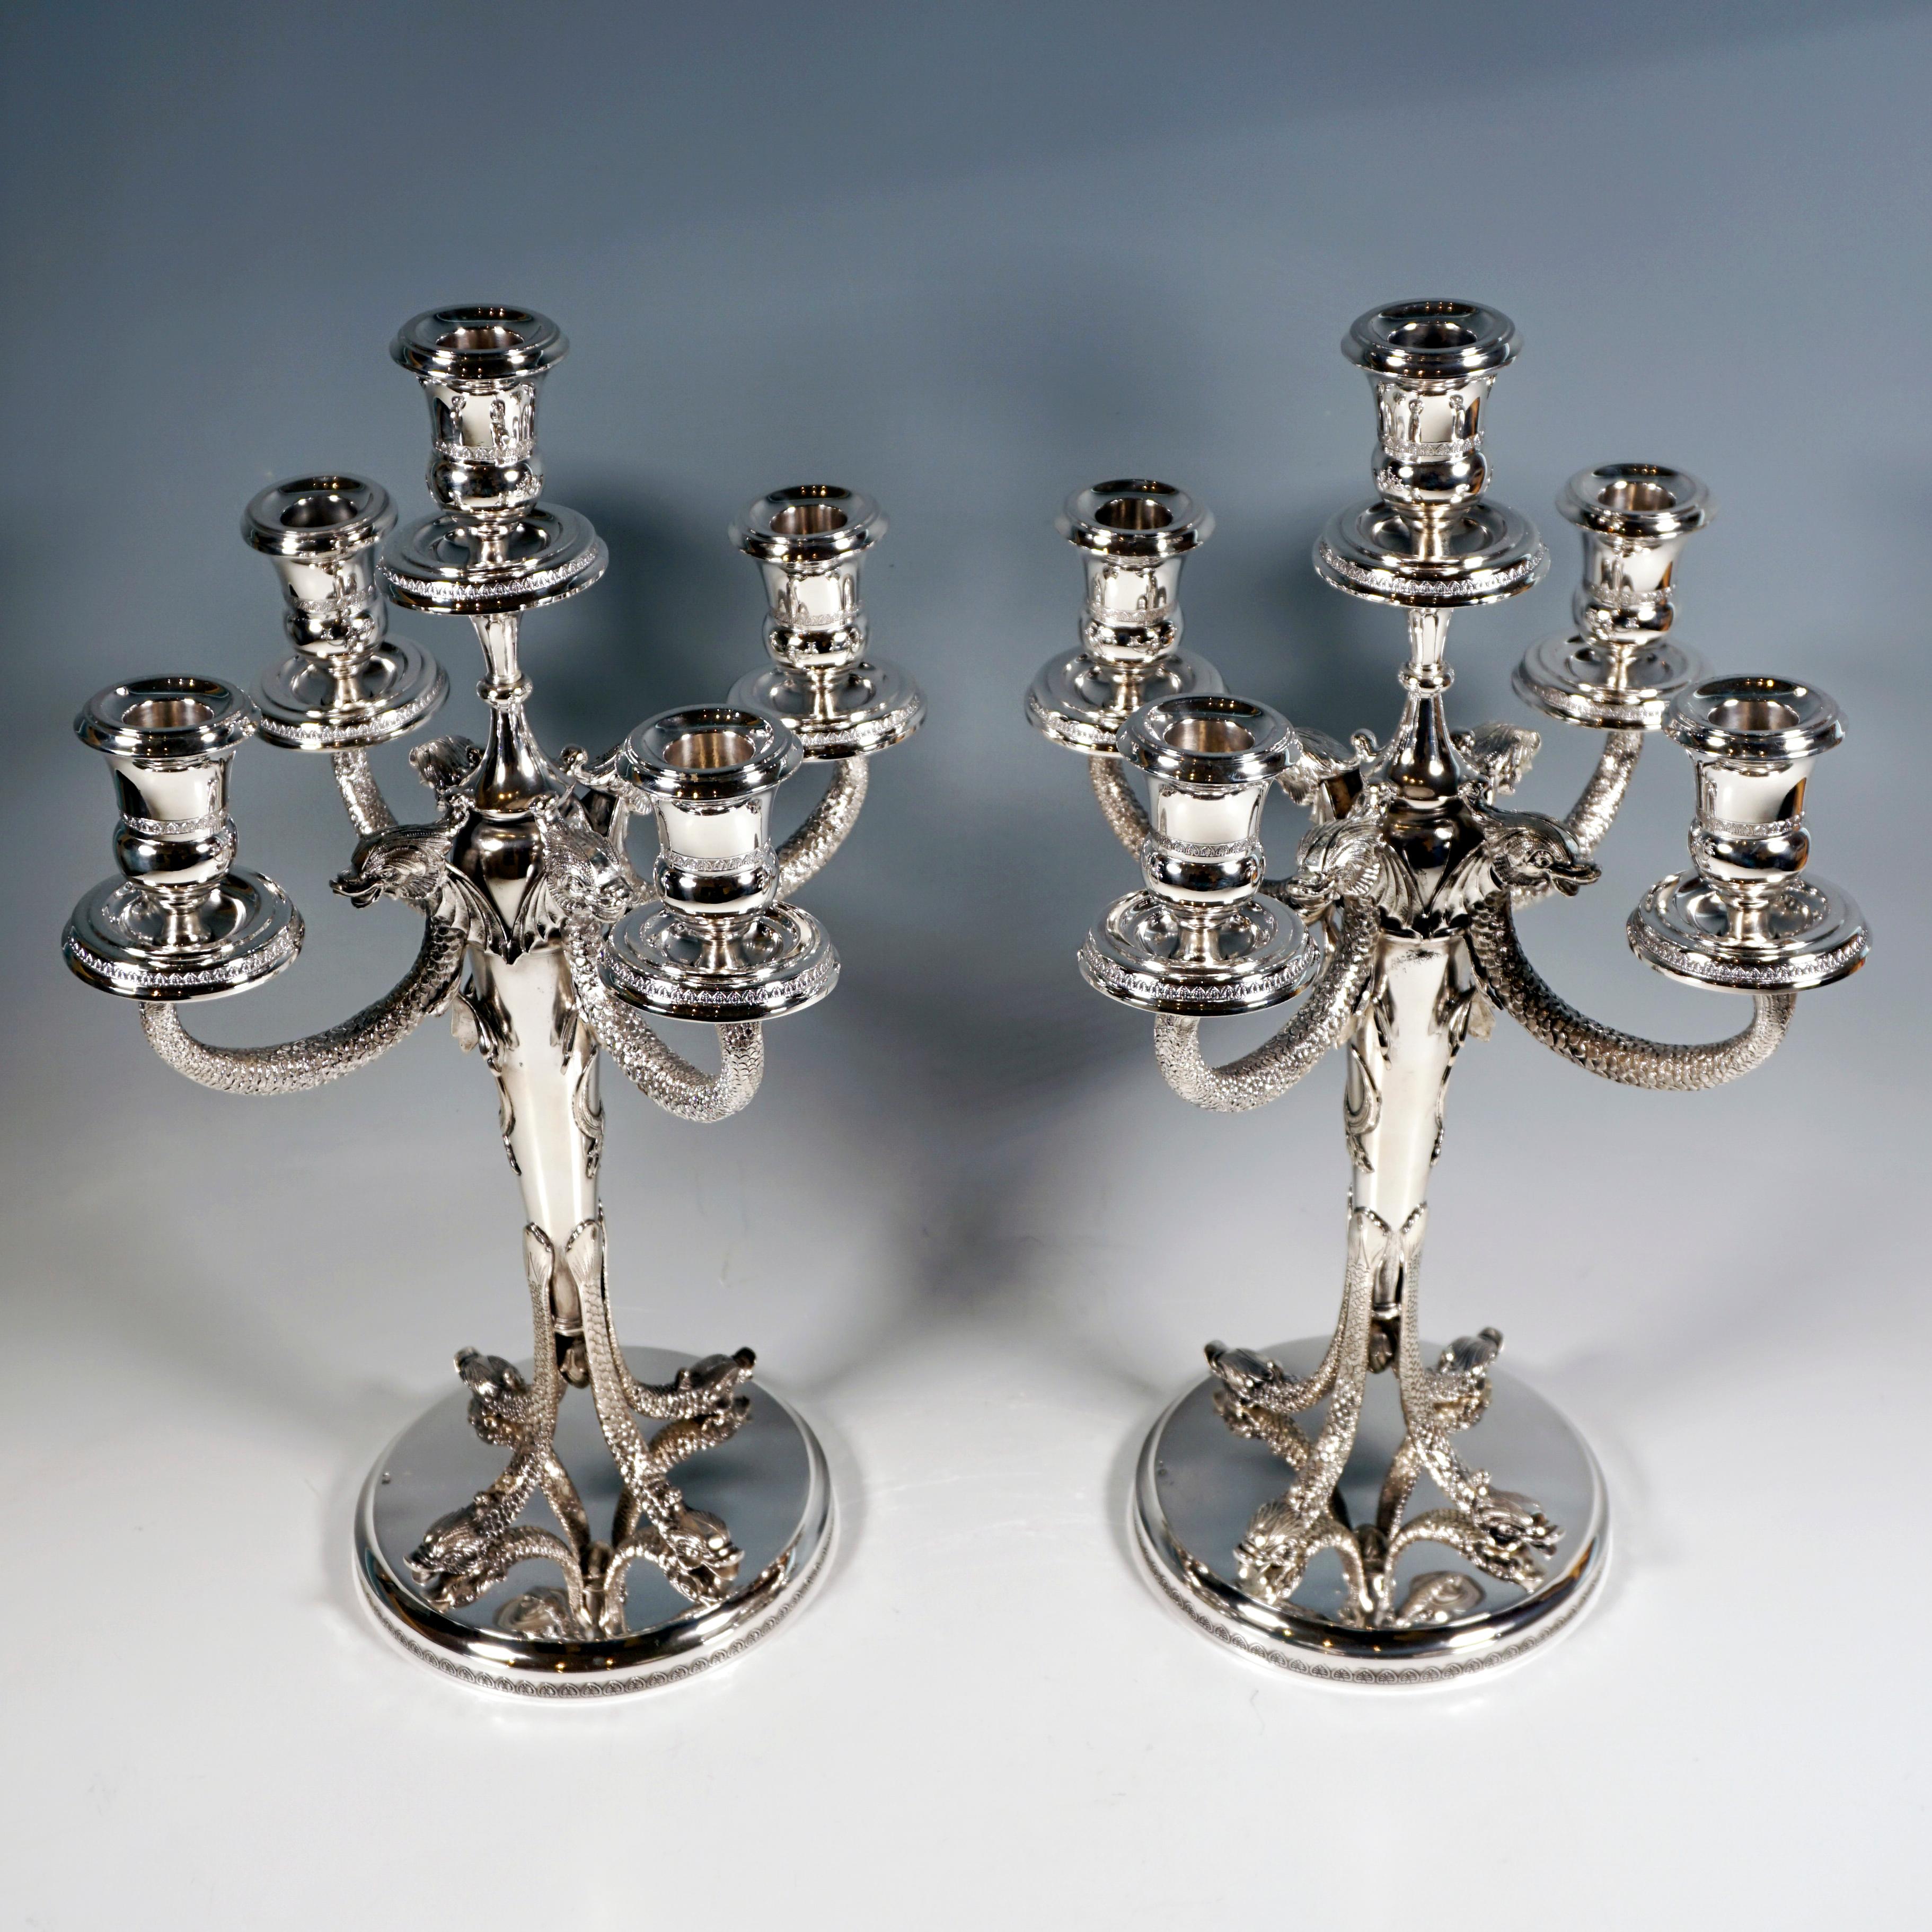 Two solid five-light candelabras, mounted on a round, fluted stepped base with a delicate palmette frieze on the side, four slender, four-pointed dolphins with their heads resting on the ground with 
their fins pointing up and supporting the